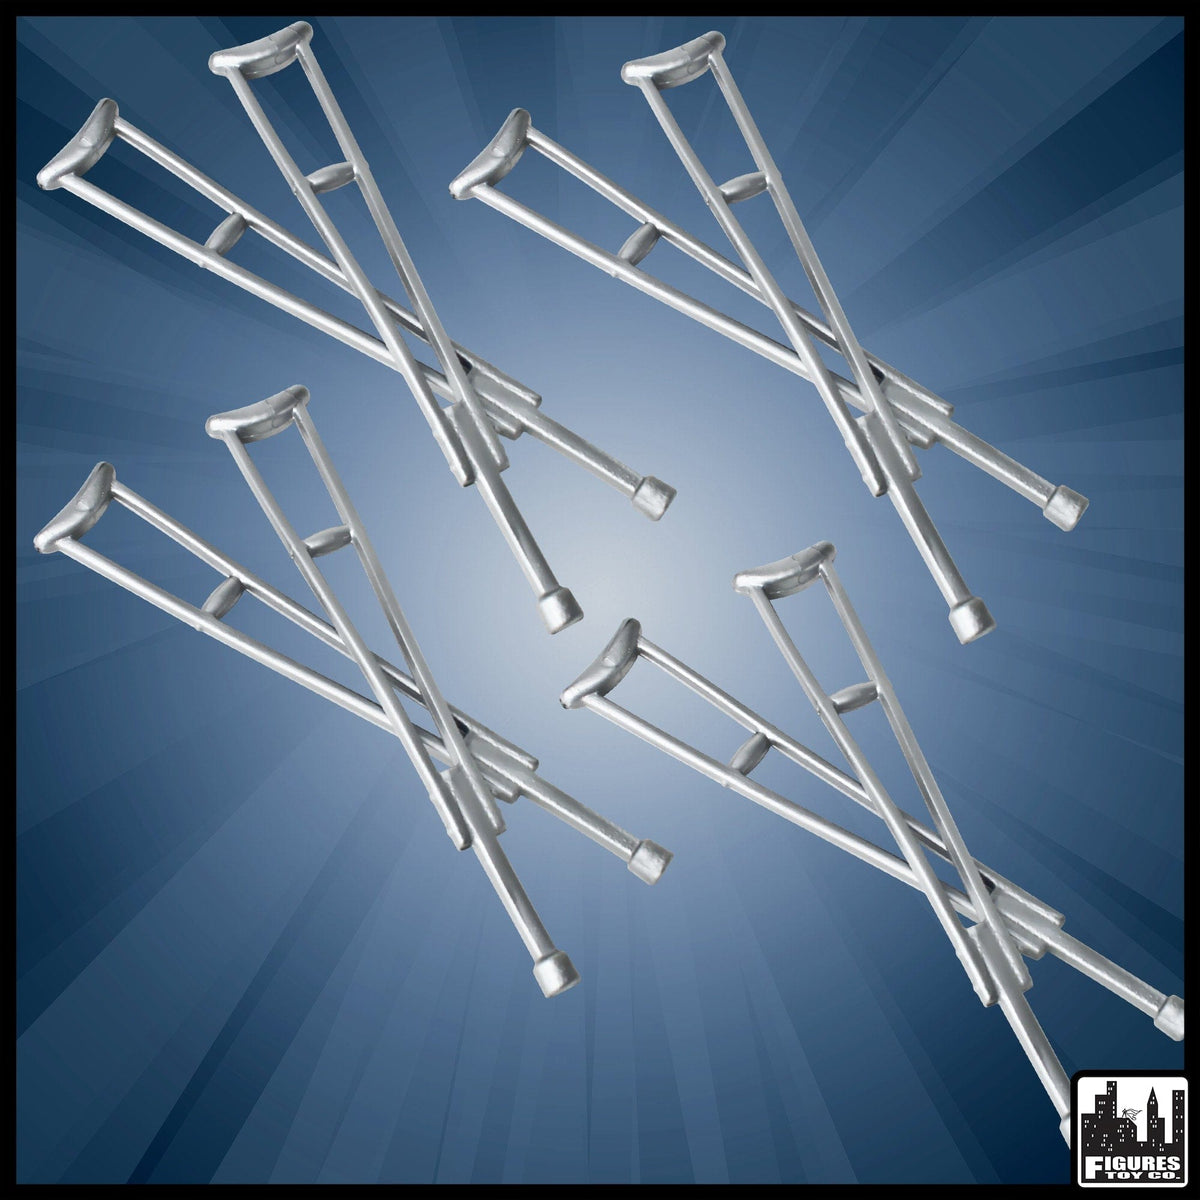 4 Pairs of Crutches for Wrestling Figures